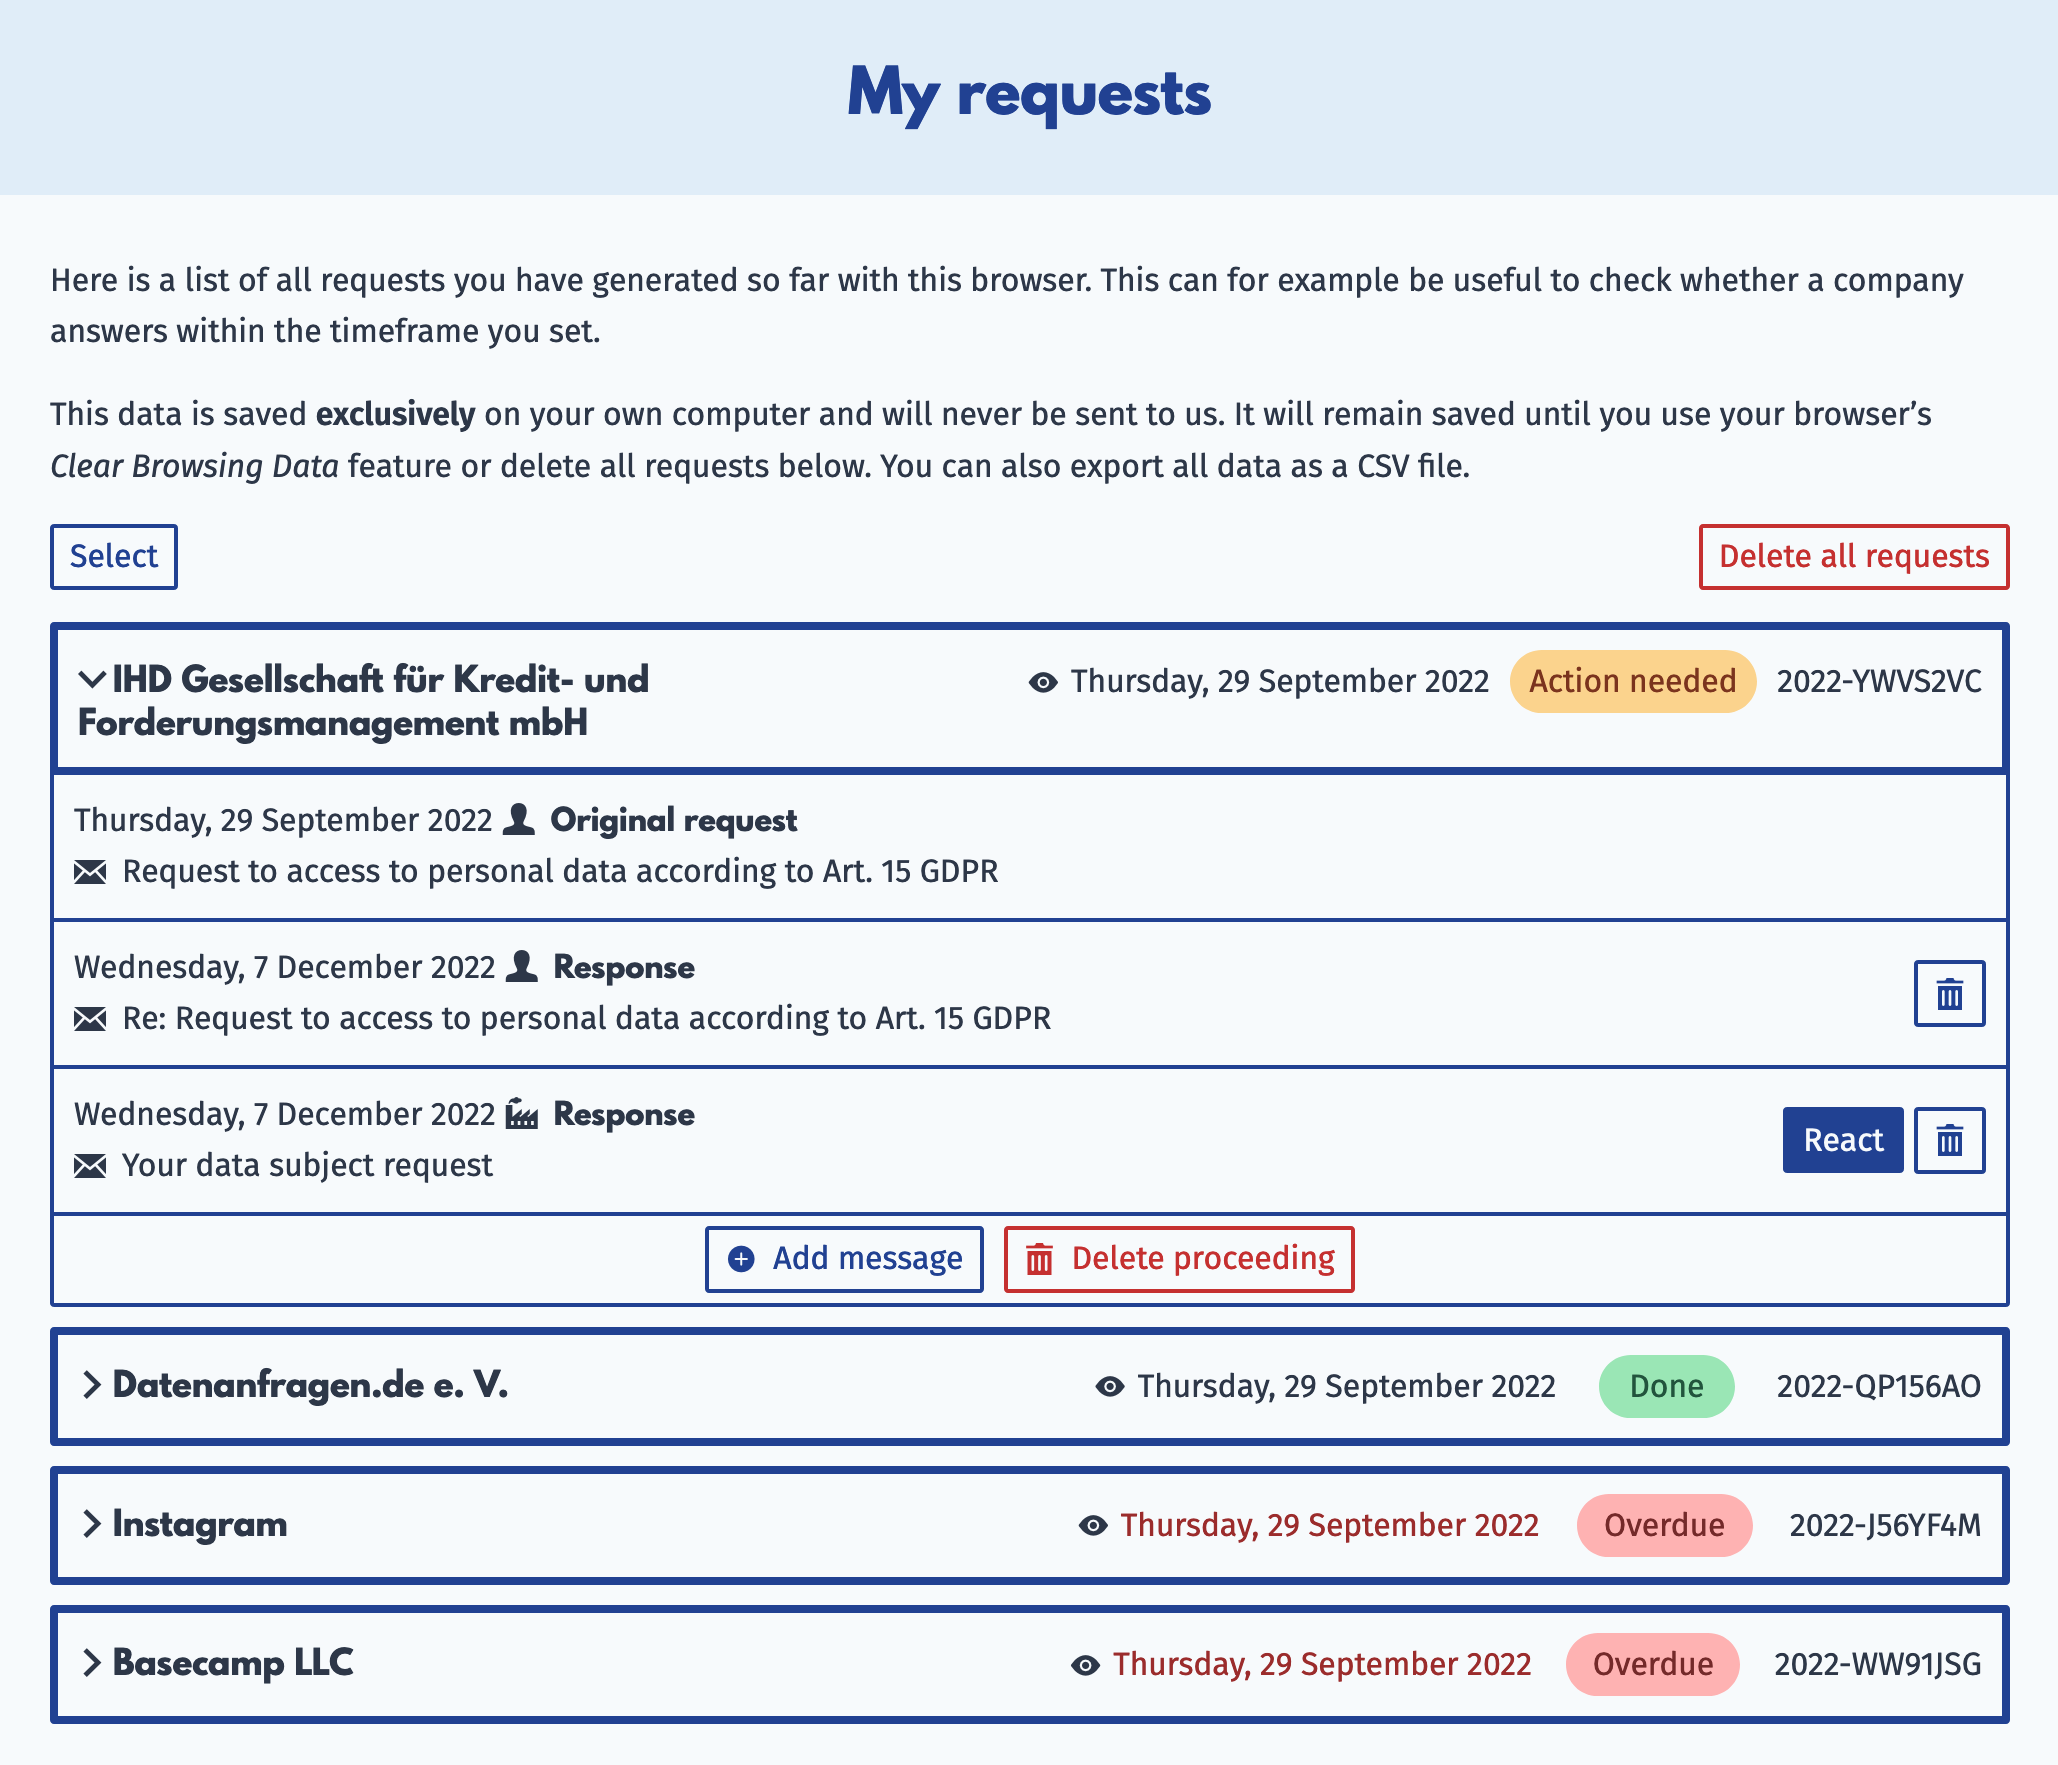 Screenshot of the “My requests” page. Under the explanation text, there are several requests with different states, such as “Action needed”, “Overdue” and “Done”. One request is expanded showing two messages, one from the user and one from the requested company.